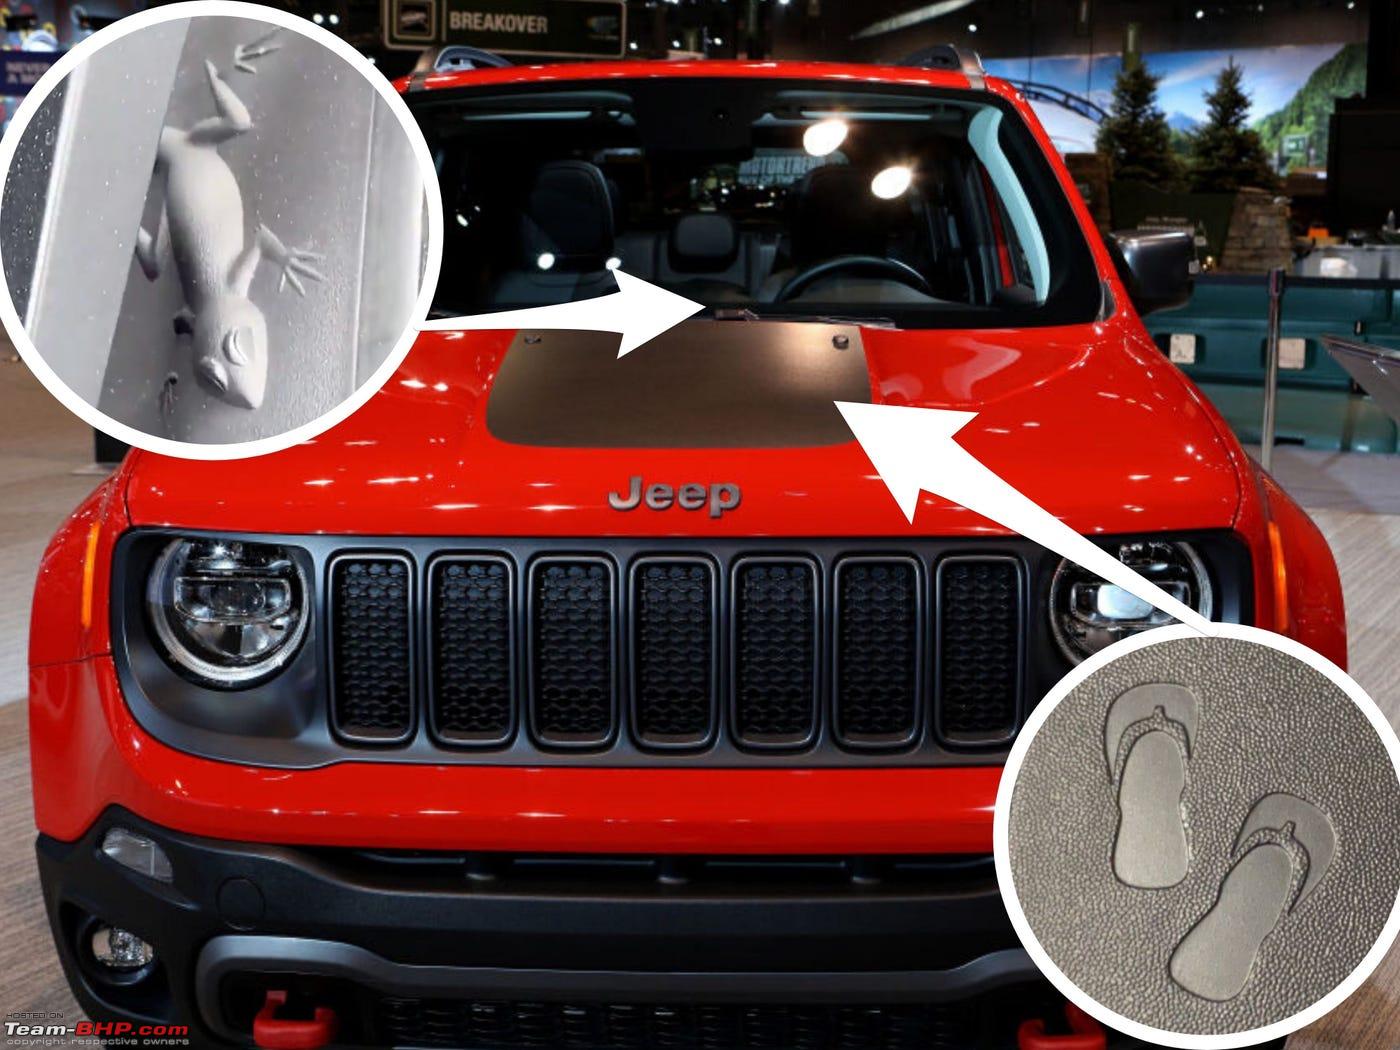 Unexpected Easter Eggs in cars (Jeep, Tata) - Team-BHP